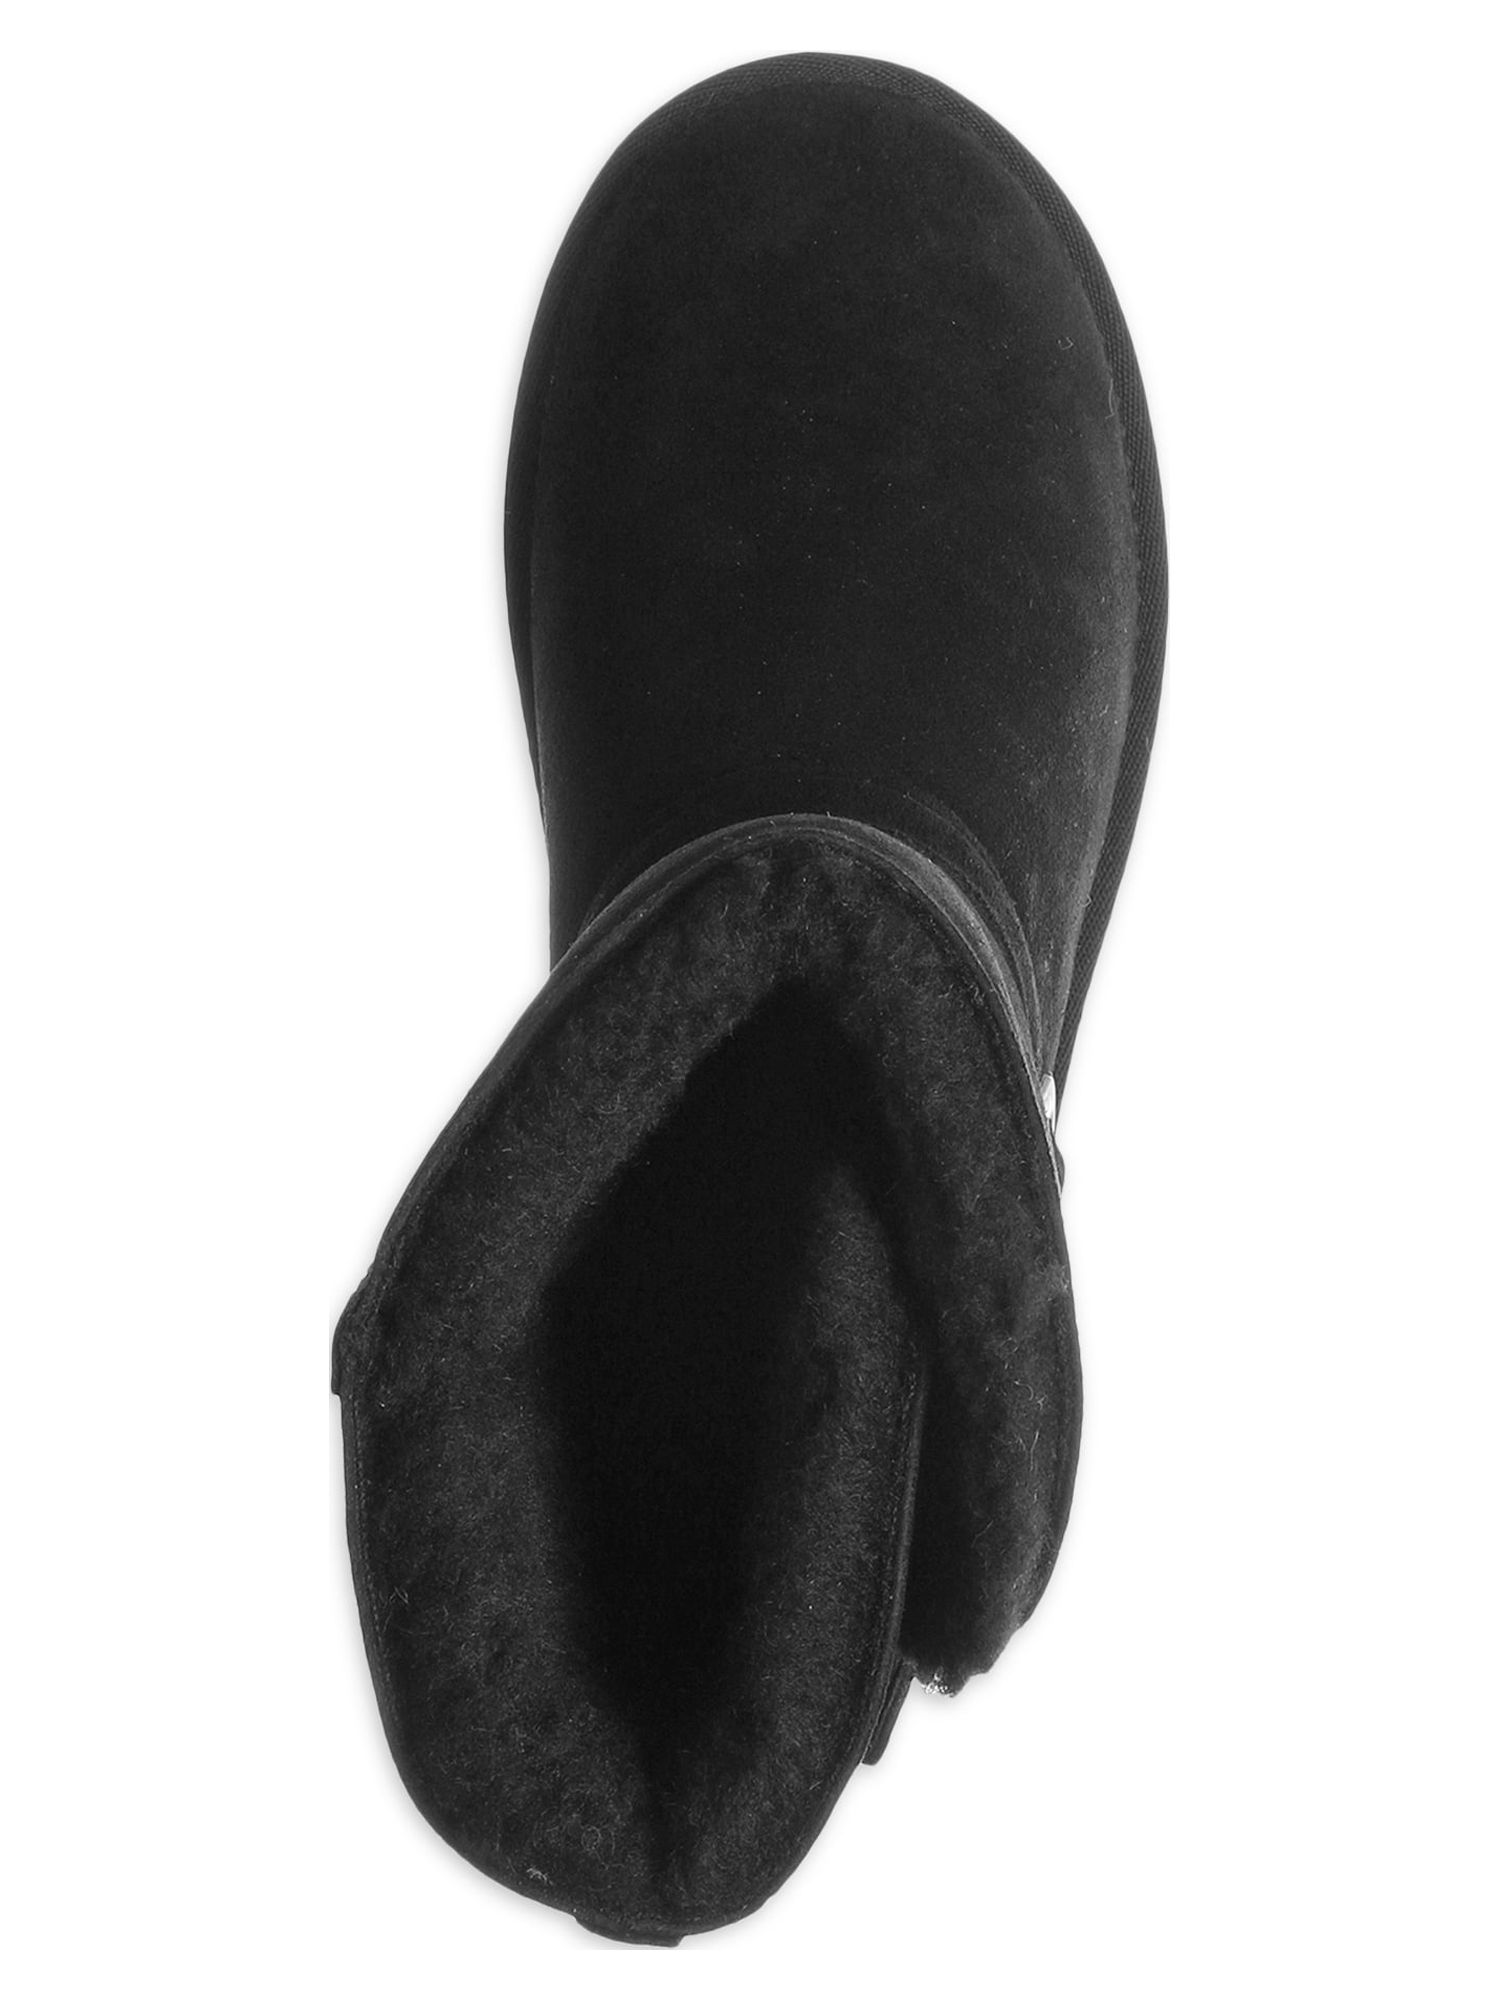 Pawz by Bearpaw Womens Camille Faux Fur Lined Suede Boot - image 3 of 5